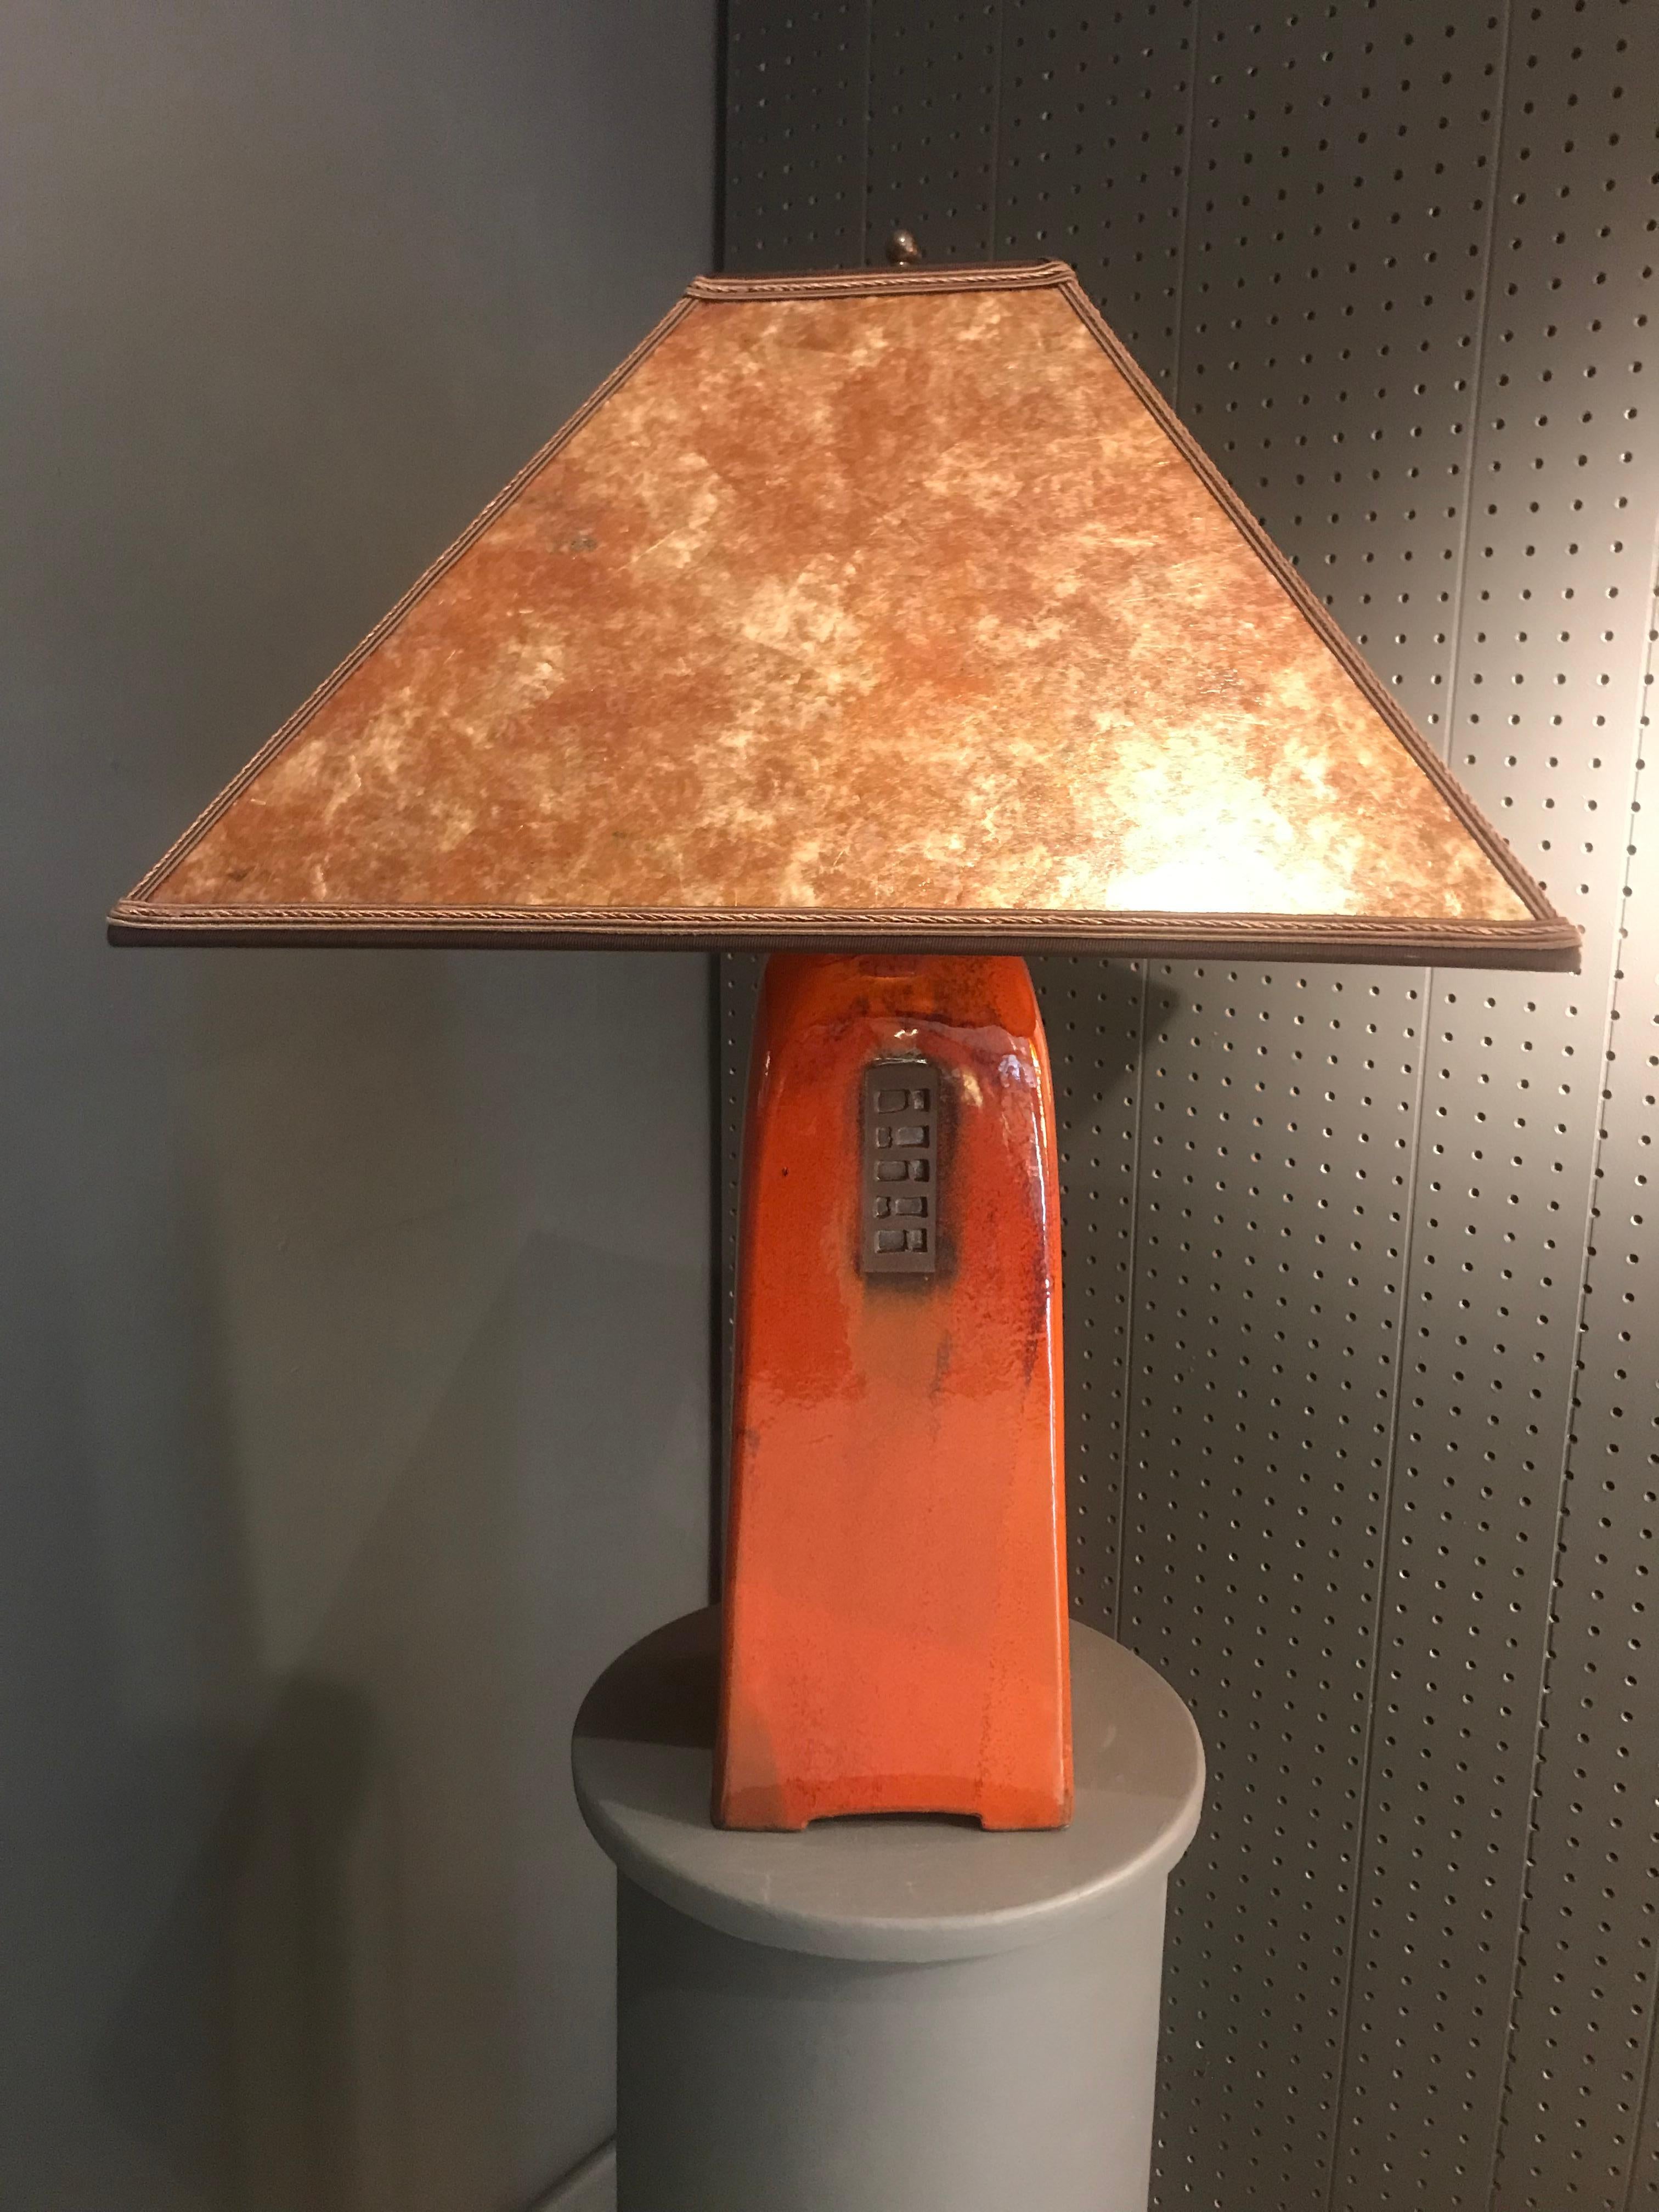 A gorgeous handmade cinnamon colored table lamp by renowned ceramic artist Jim Webb from his North Union Collection, having a russet glaze with amber mica shade. Lamp is high-fired stoneware, skillfully hand-built, signed and numbered inside the